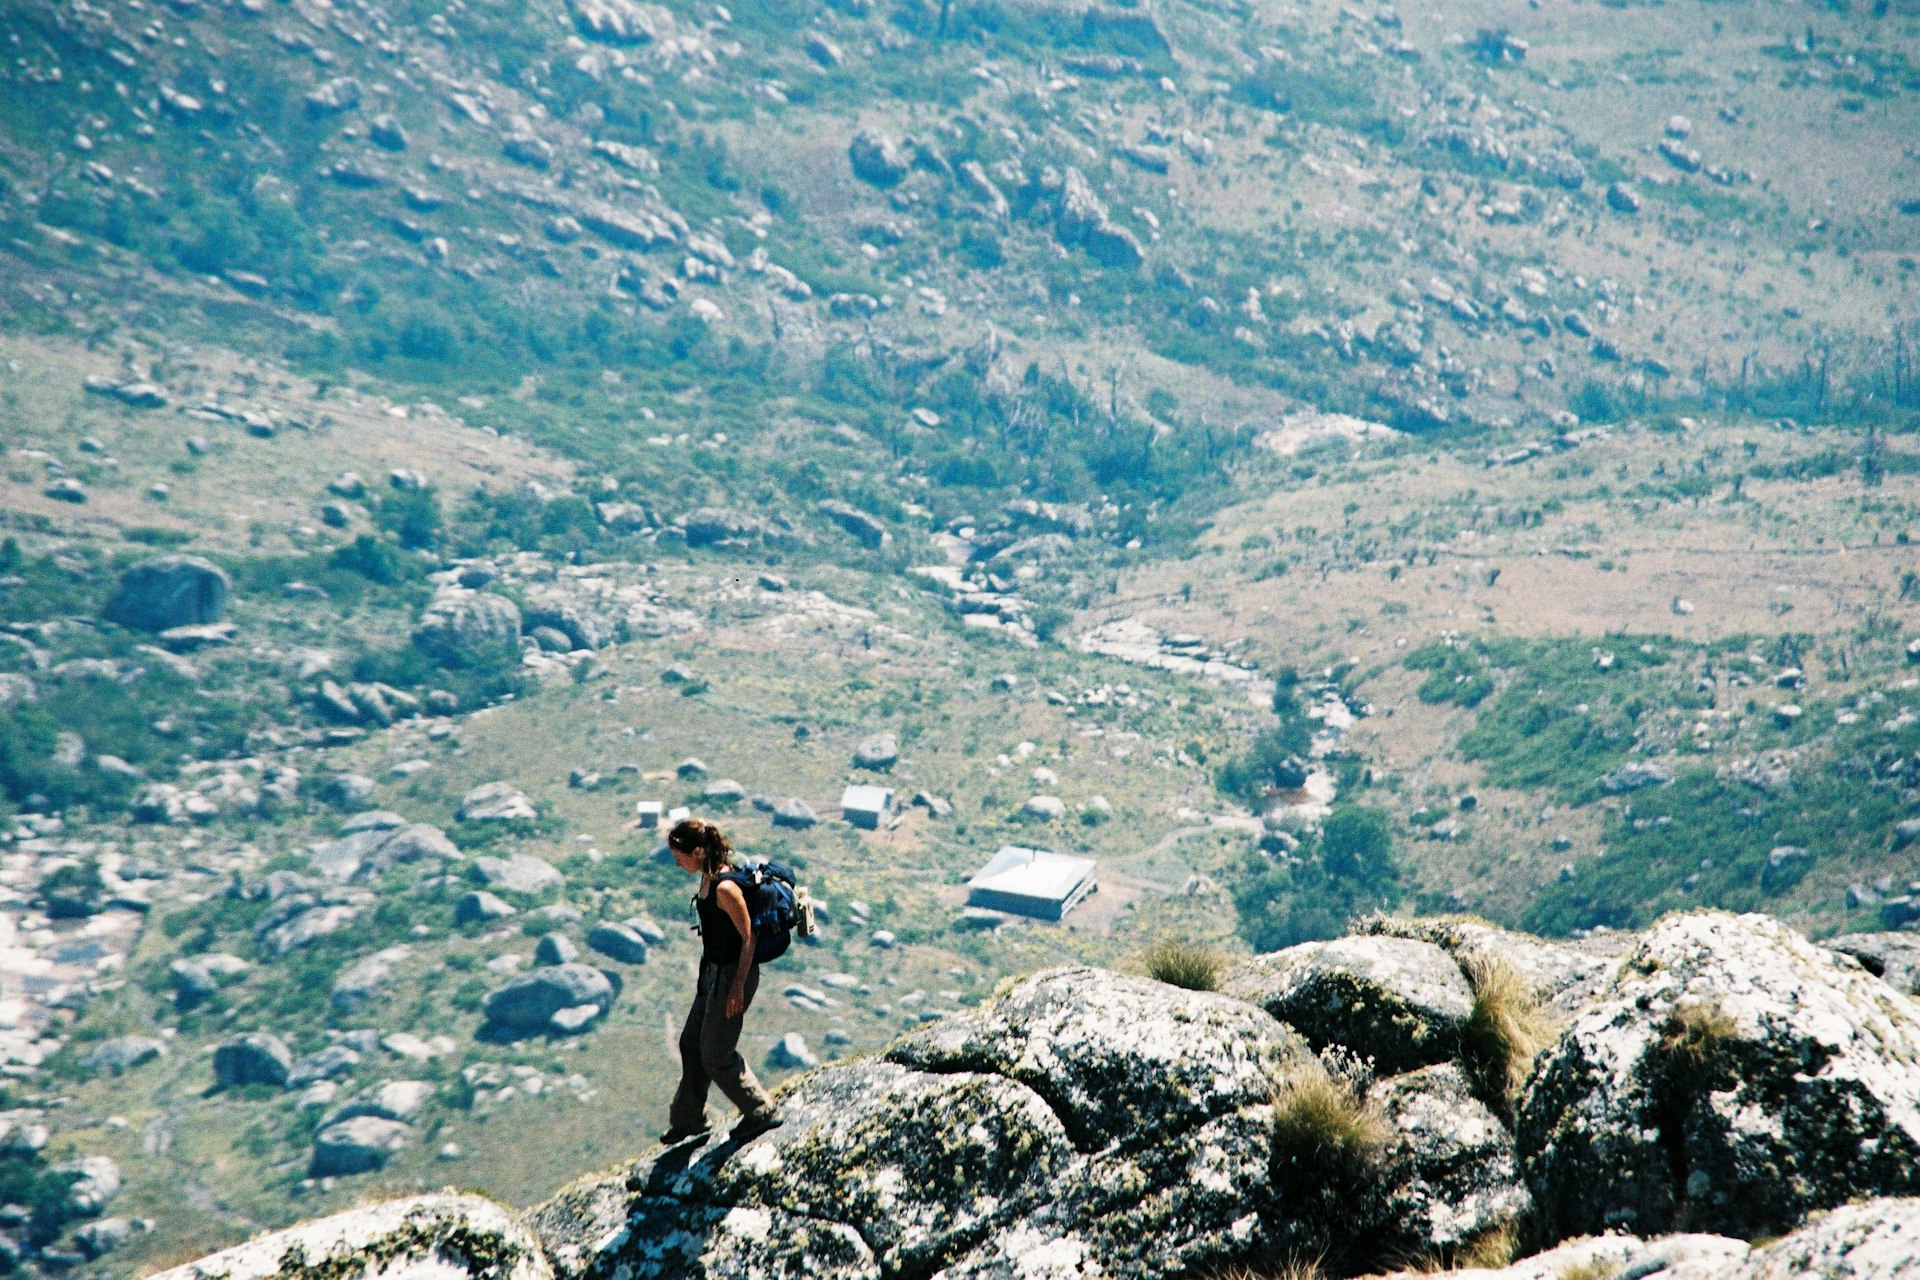 A solo woman carrying a backpack hikes down a rocky mountain ridge. A hut is in the valley below.